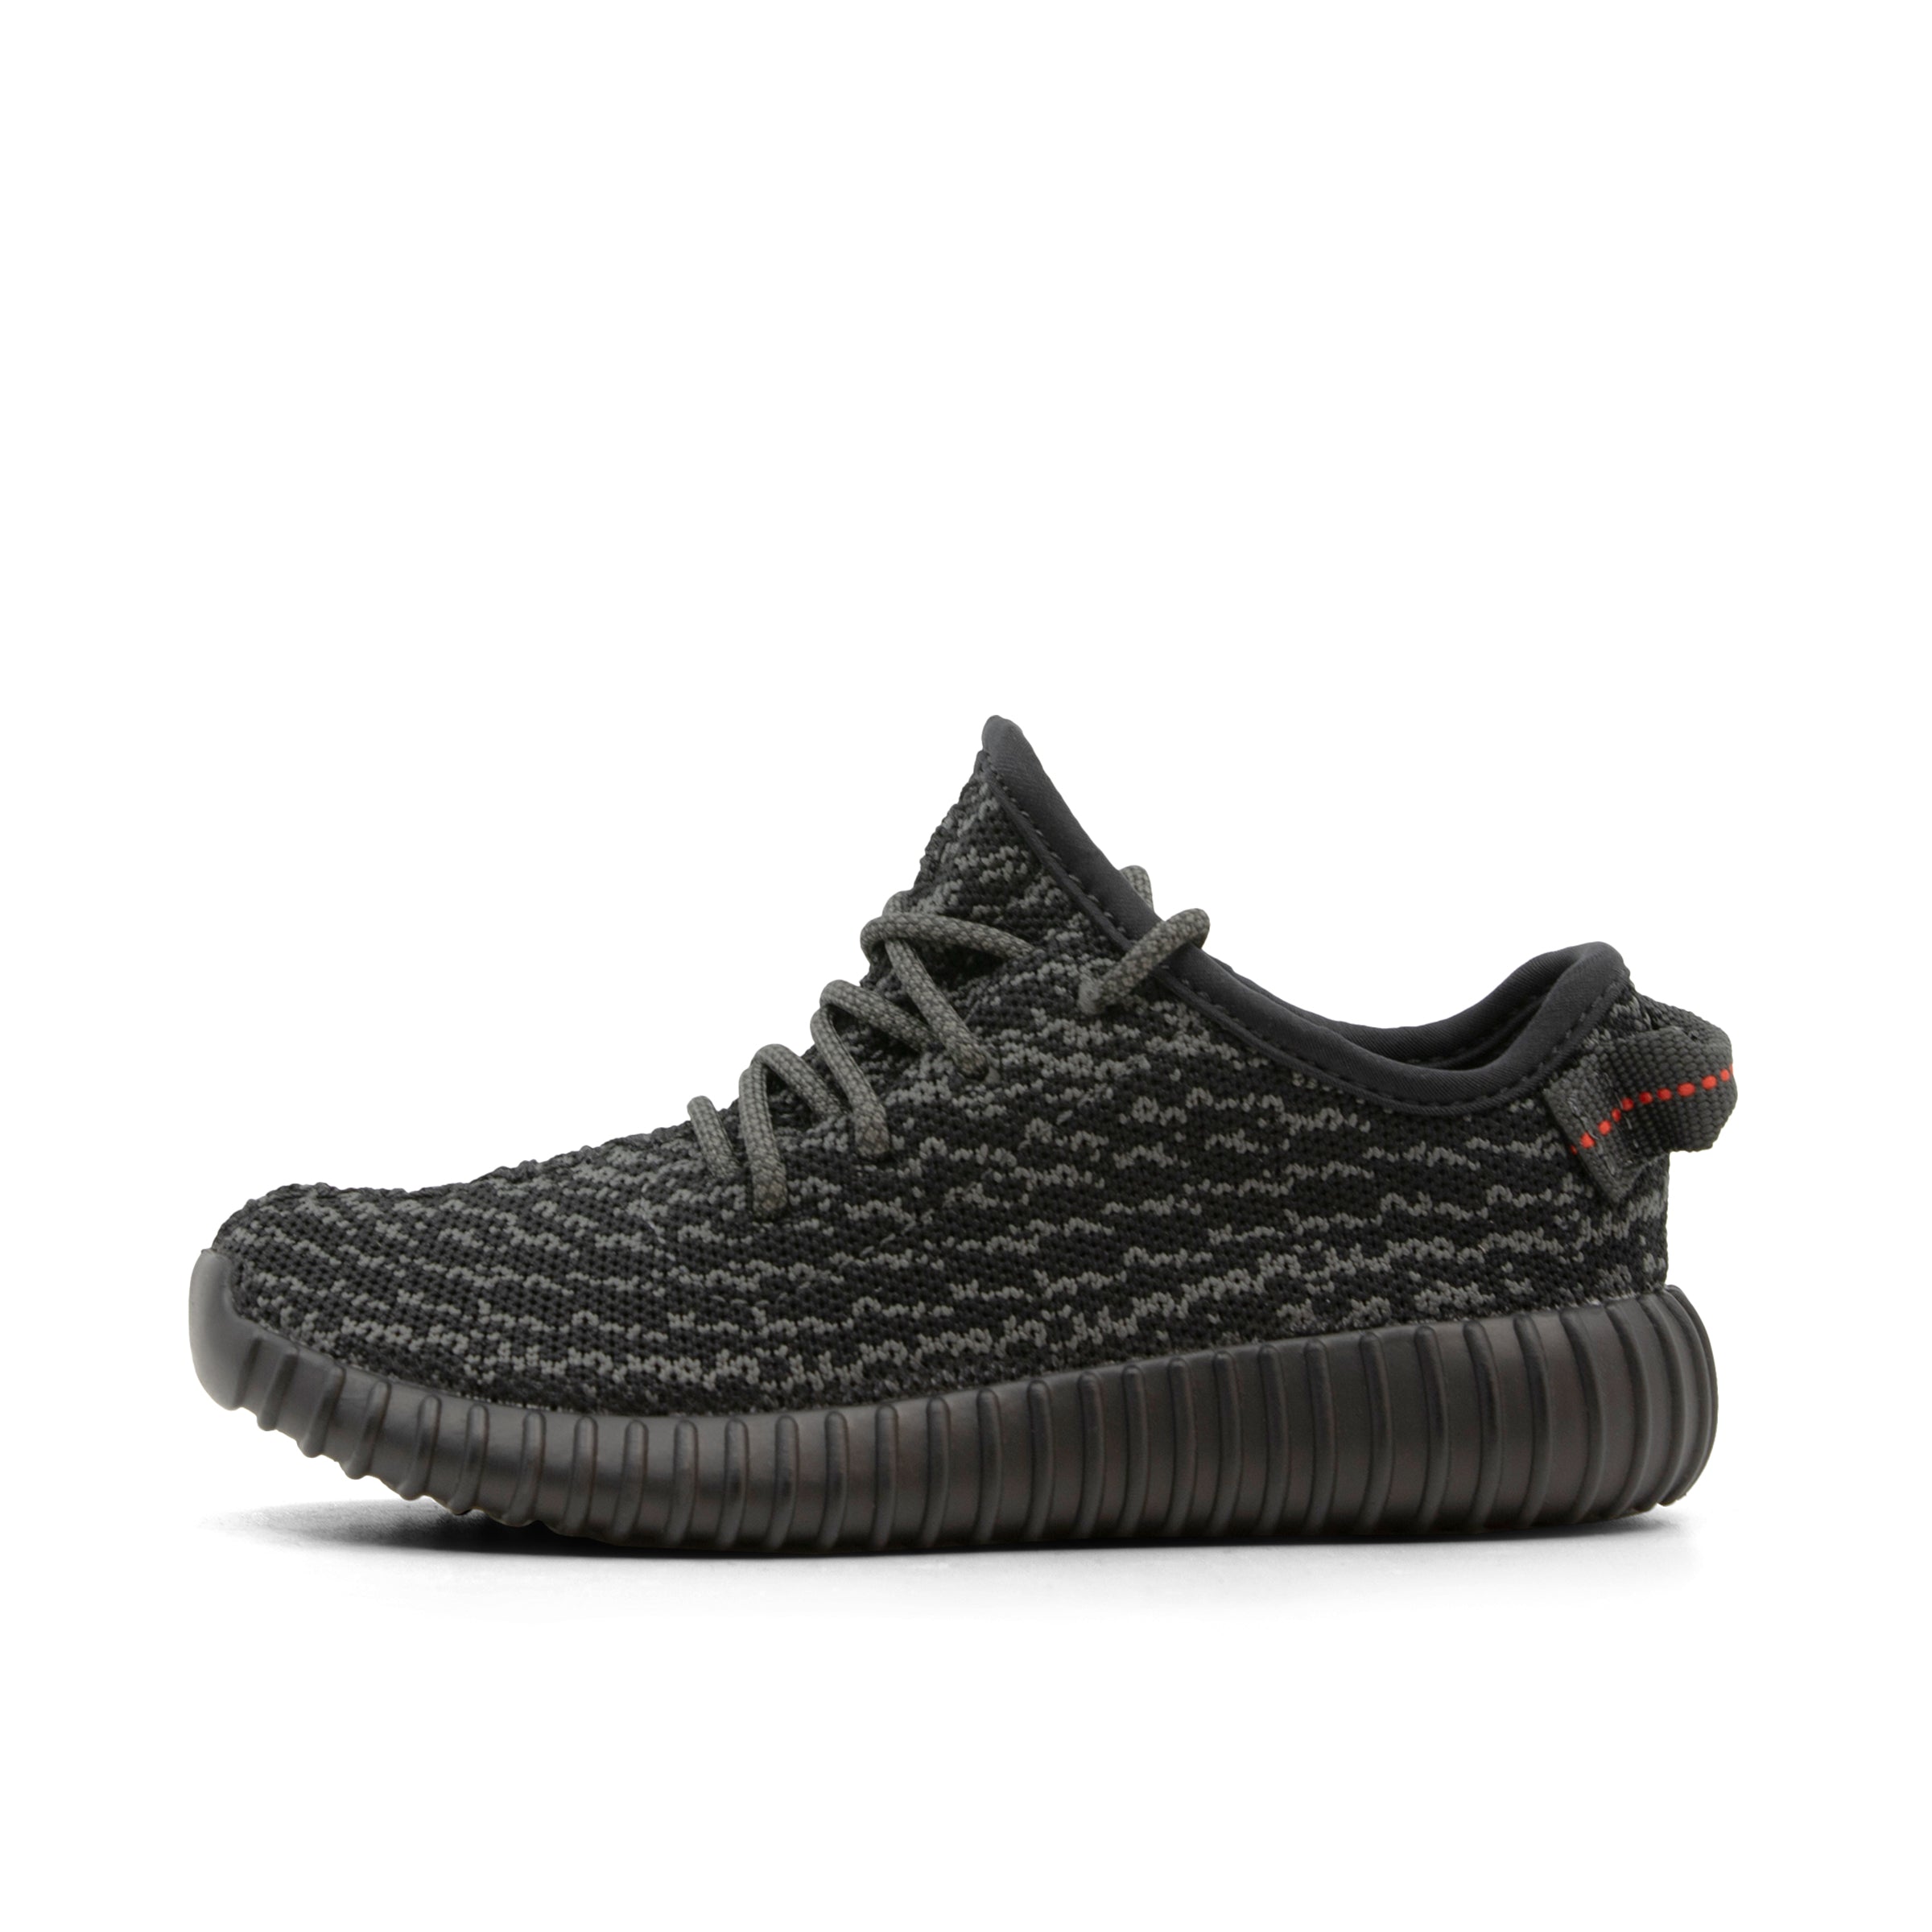 YEEZY BOOST 350 INFANT PIRATE BLACK